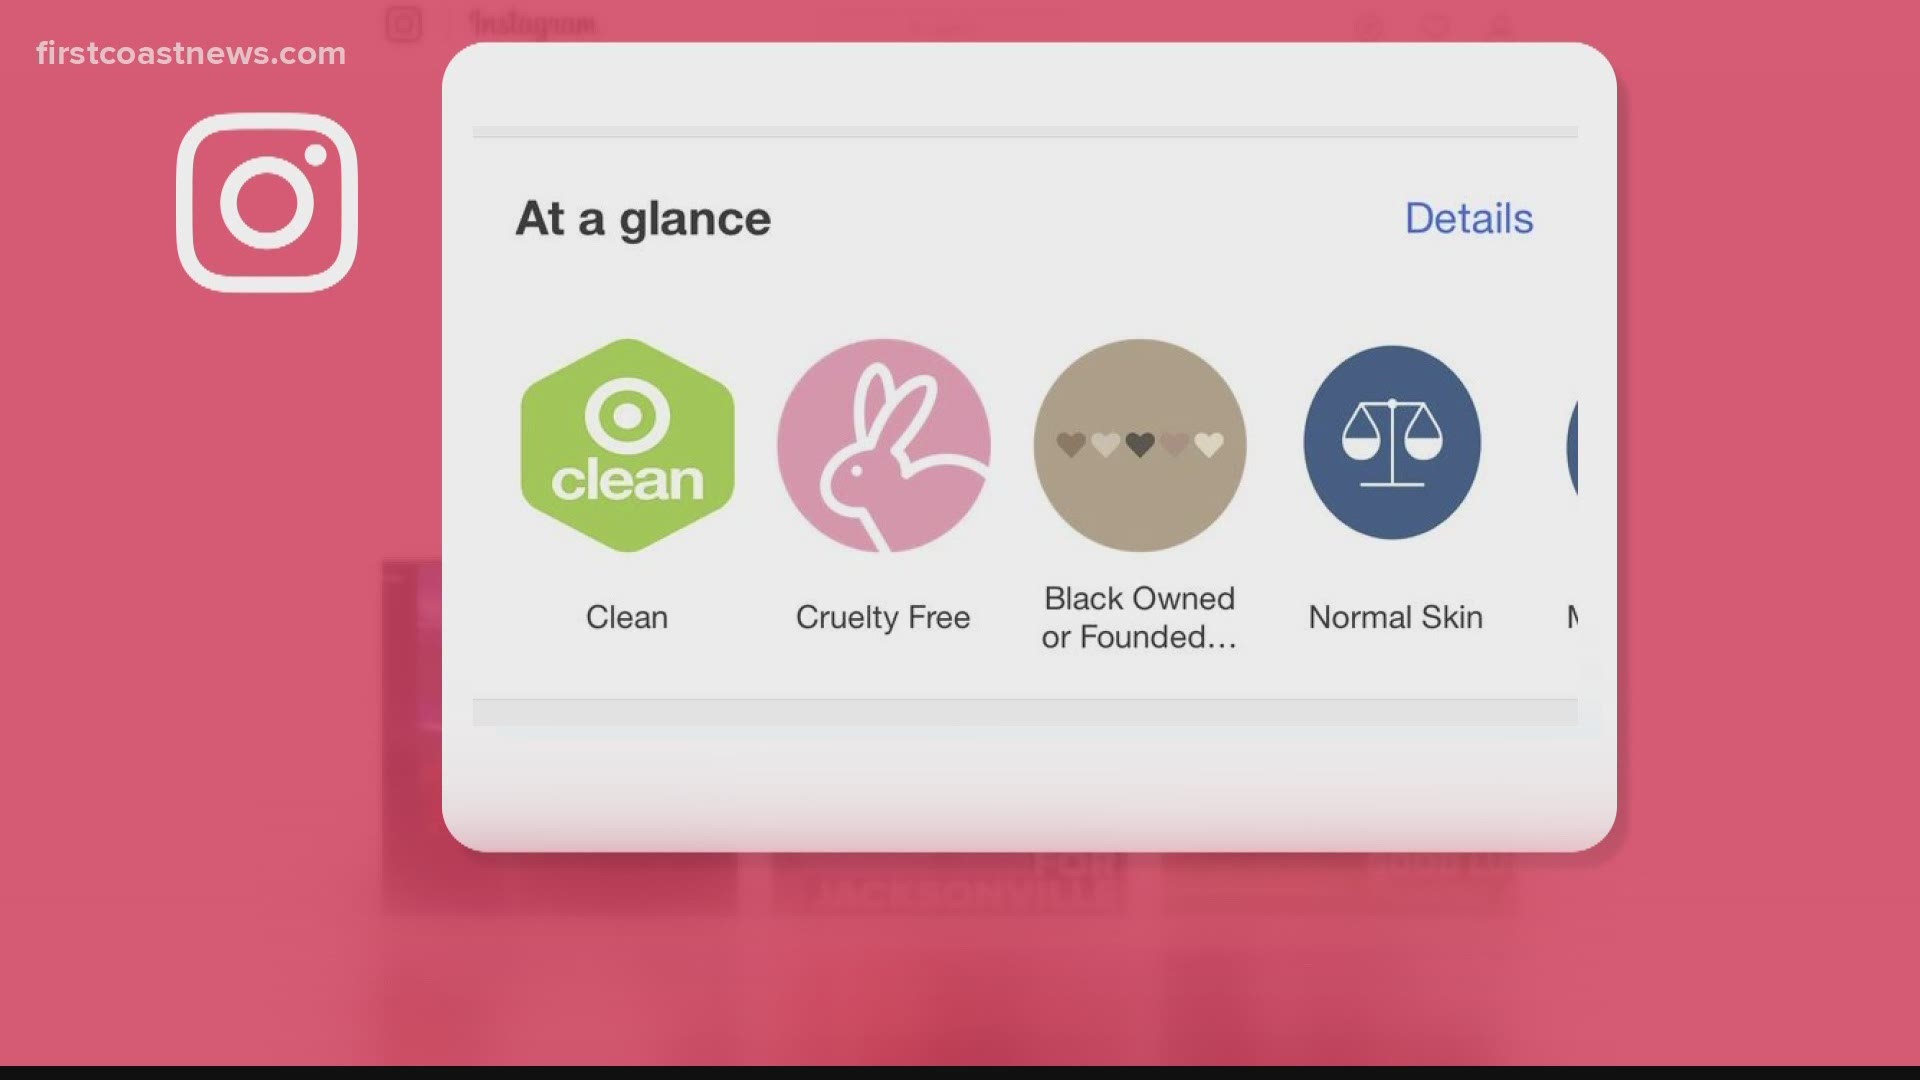 The badge can be seen on Target's 'At a Glance' section.